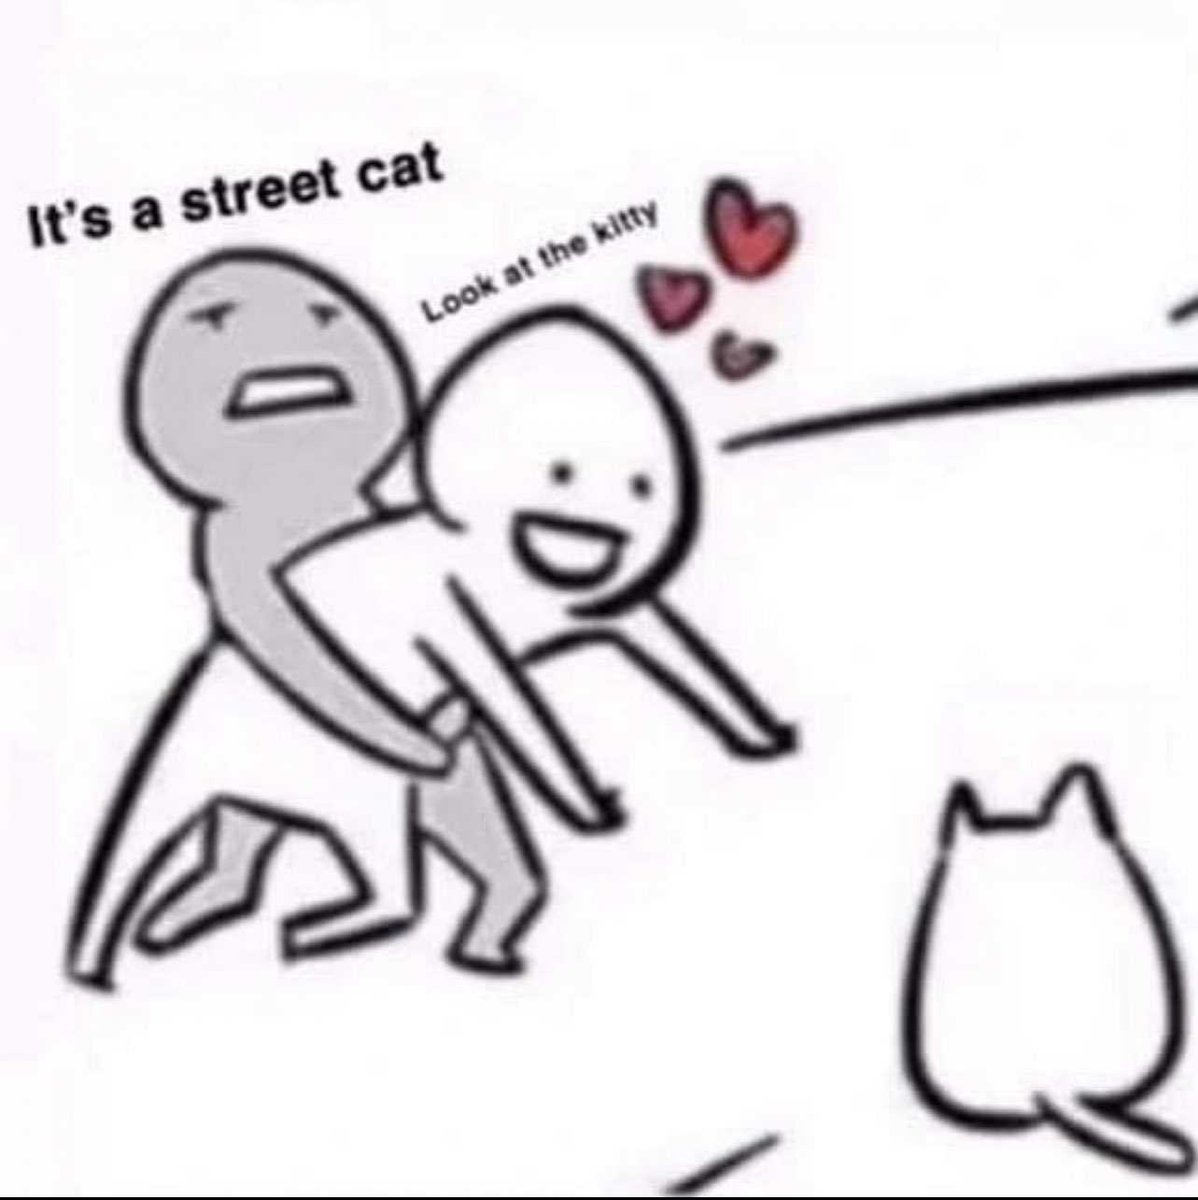 Me everytime i see cat